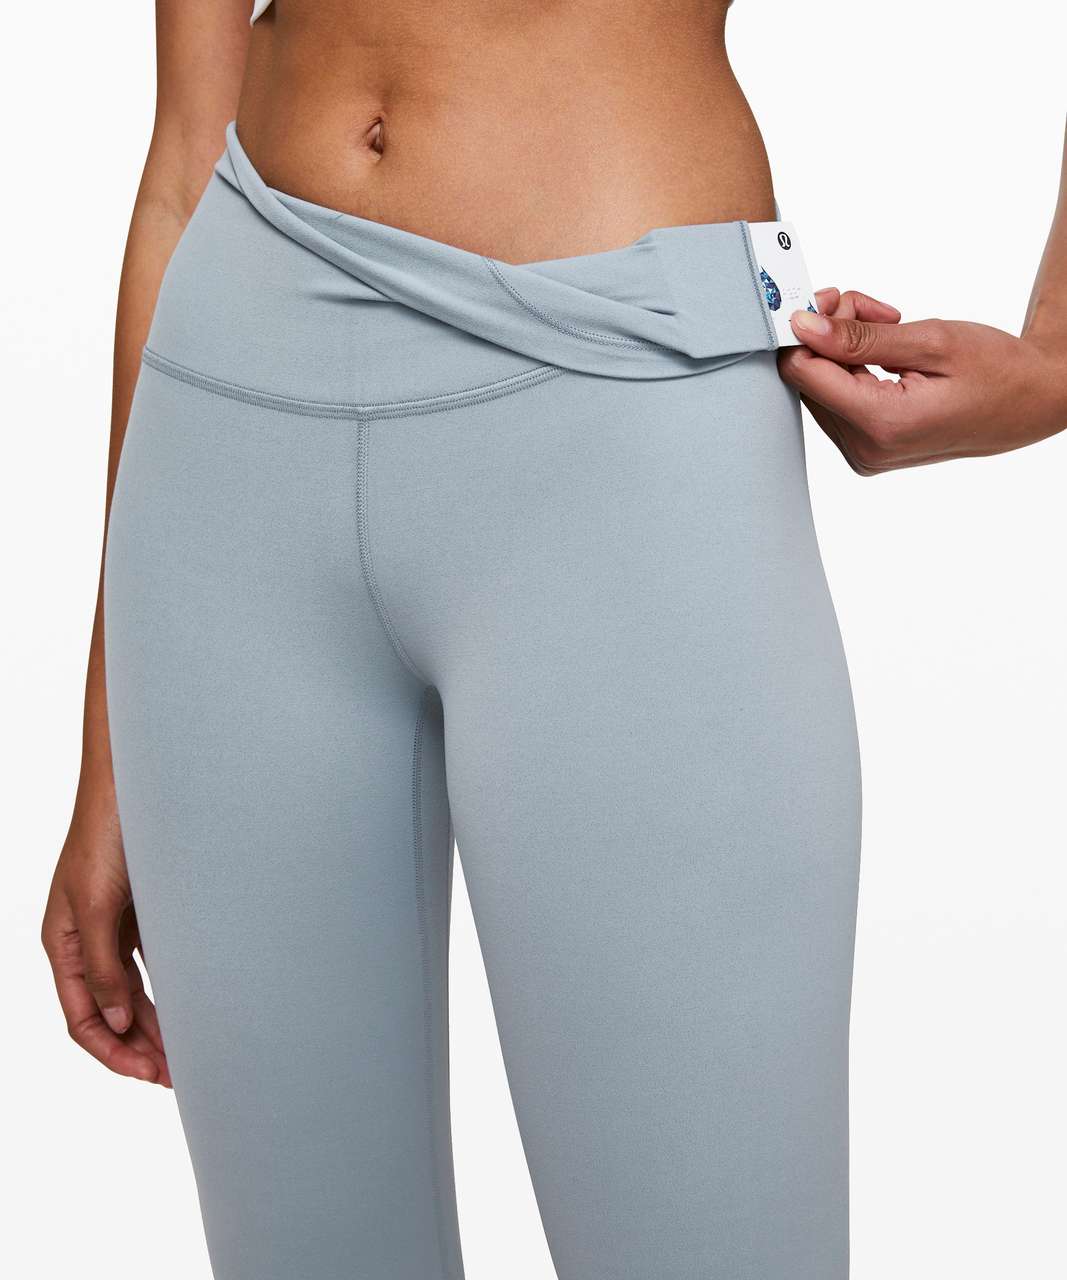 Lululemon align pants in chambray High waist with - Depop